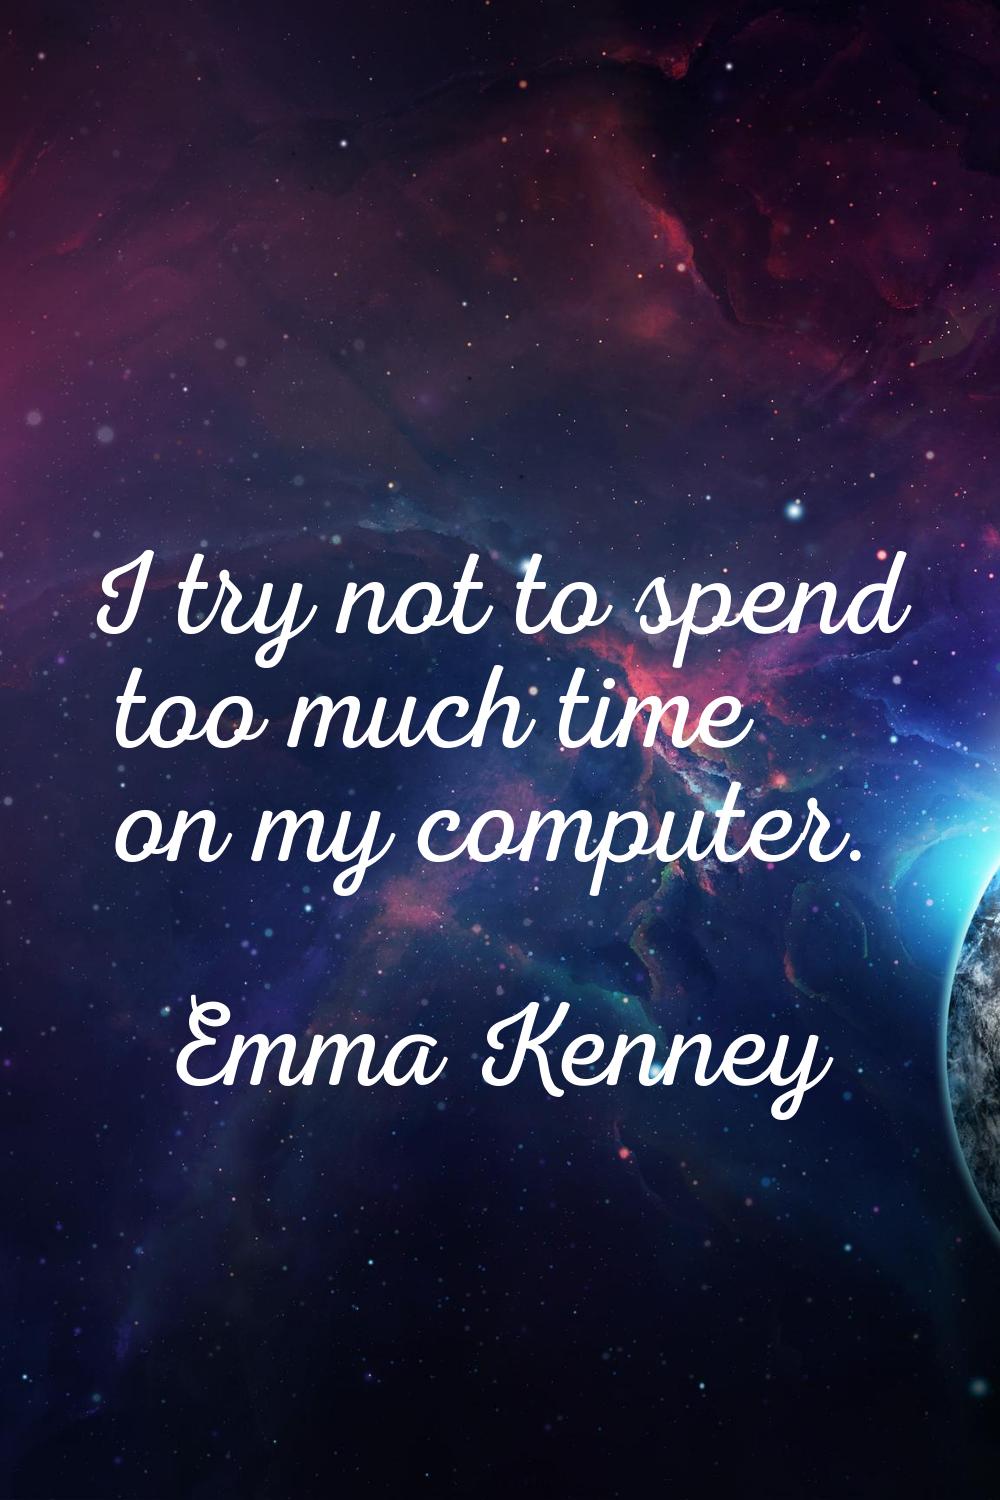 I try not to spend too much time on my computer.